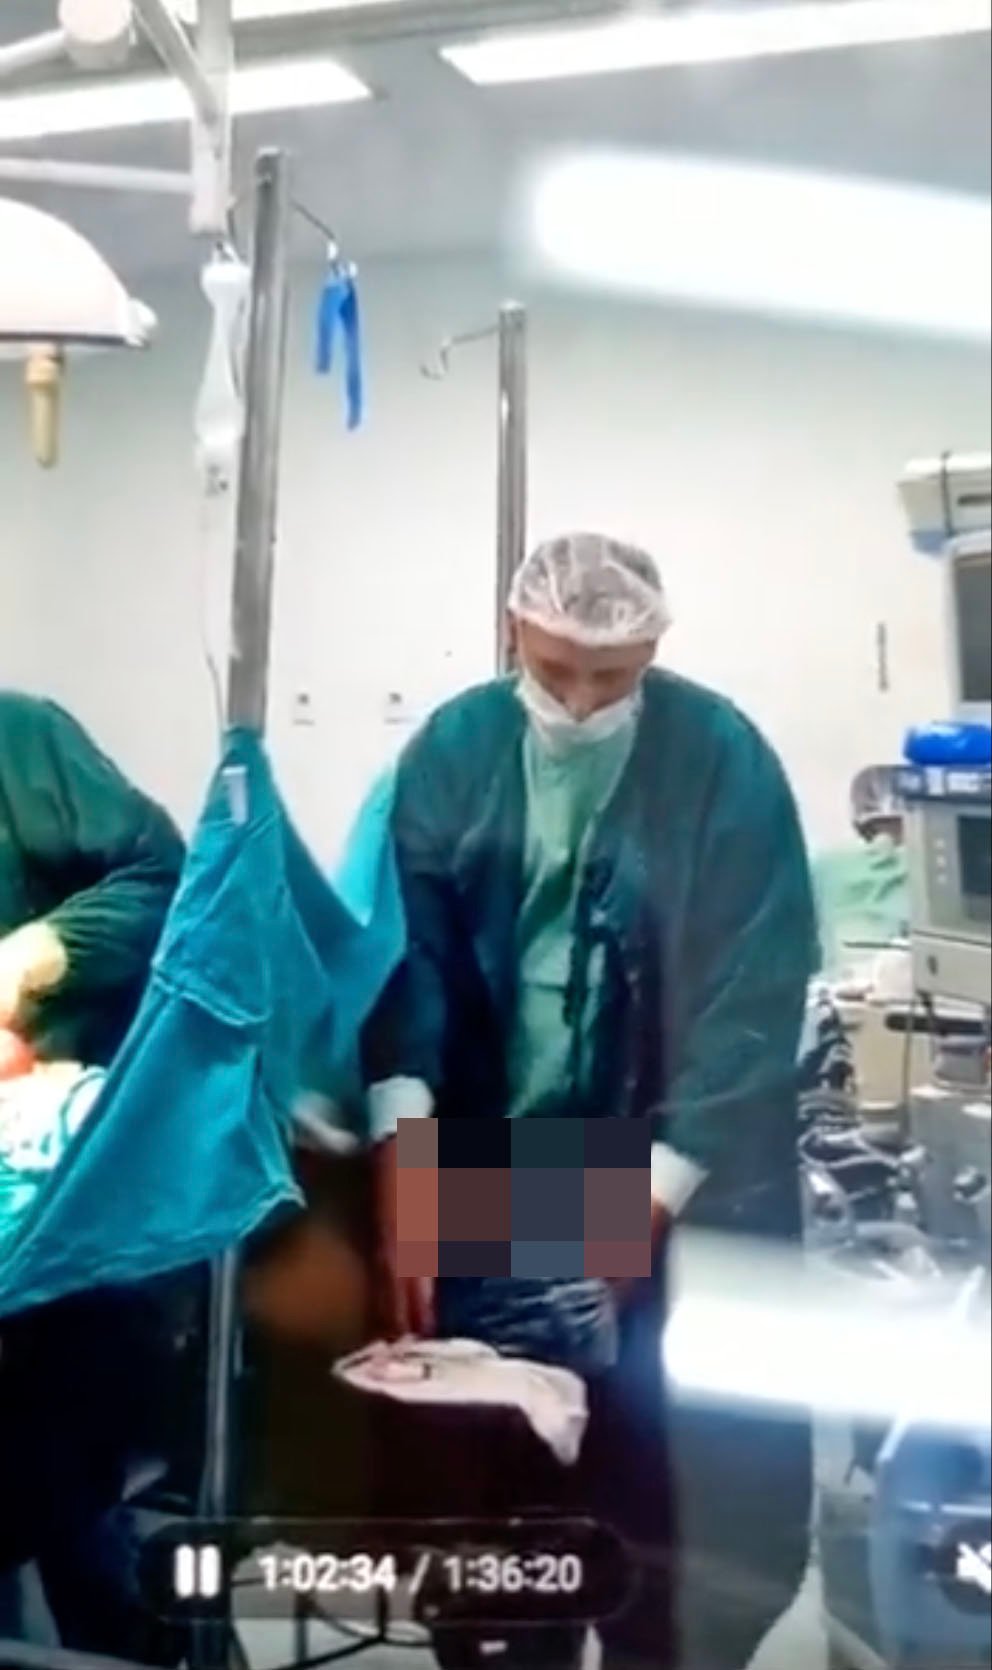 Brazil S Doctor And Peshant Sex Videos - Brazilian Doctor Sexually Assaults Woman Undergoing C-Section, Action  Caught On Camera